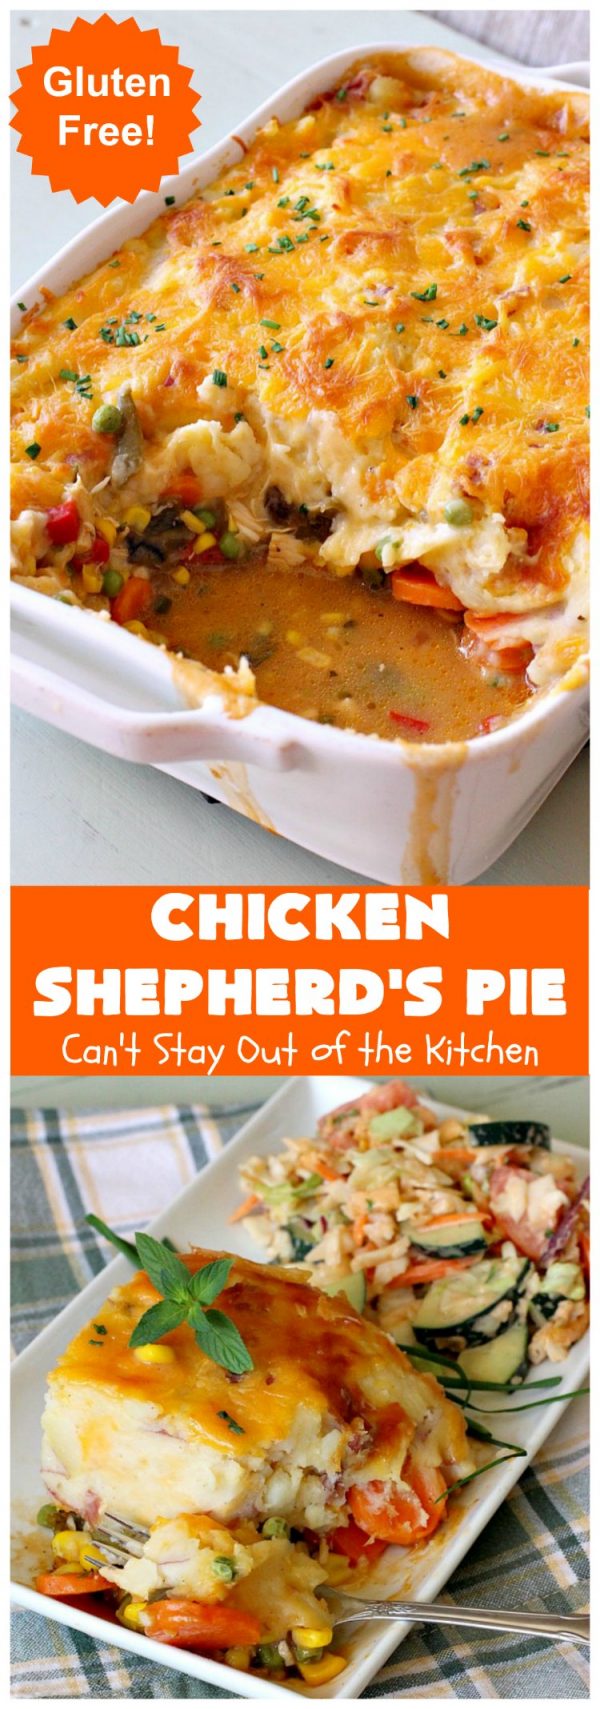 Chicken Shepherd’s Pie – Can't Stay Out of the Kitchen